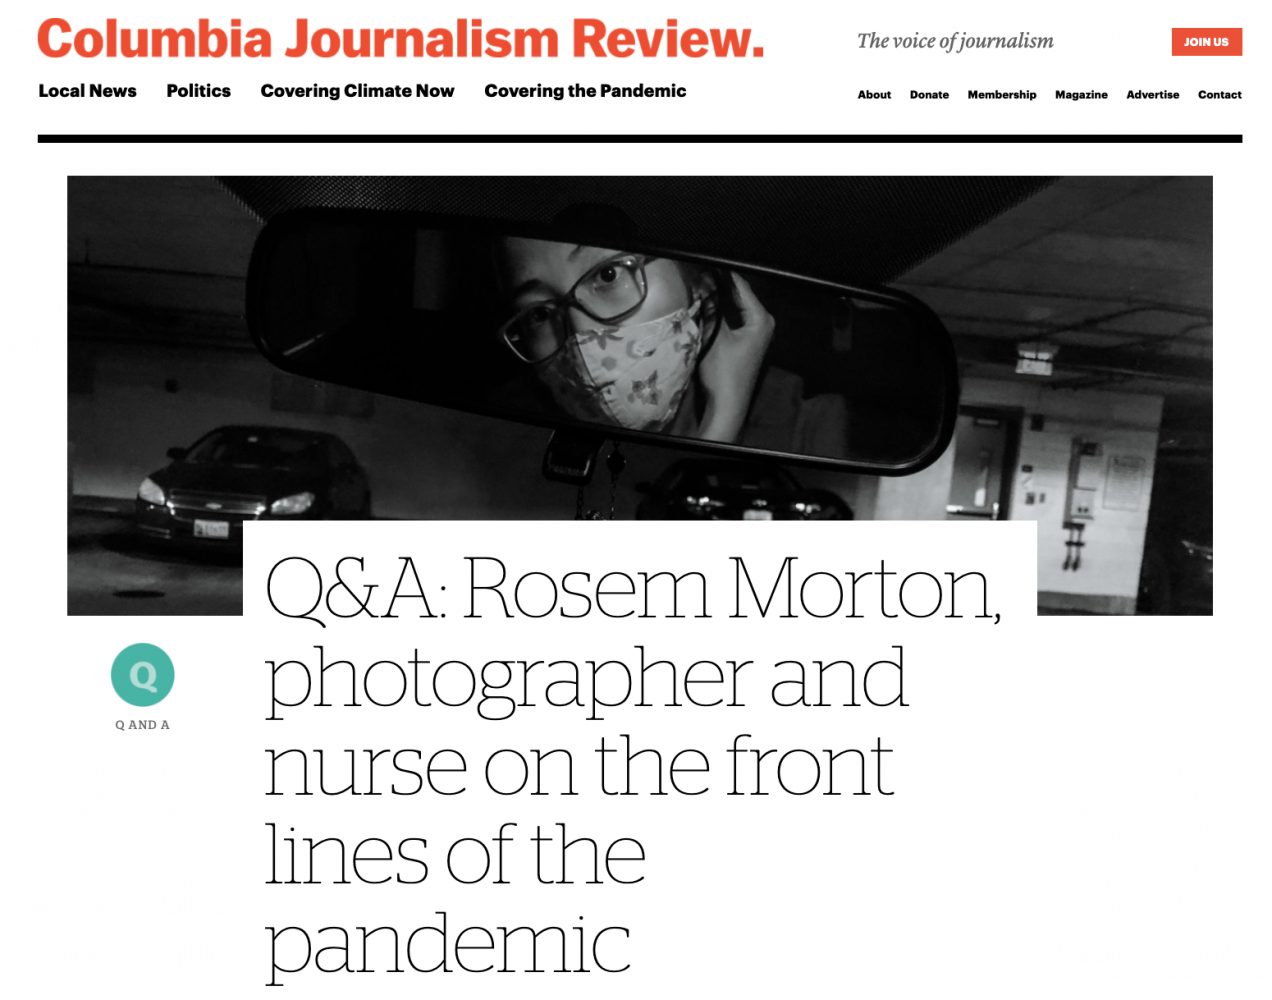 CJR: Q&A: Rosem Morton, photographer and nurse on the front lines of the pandemic